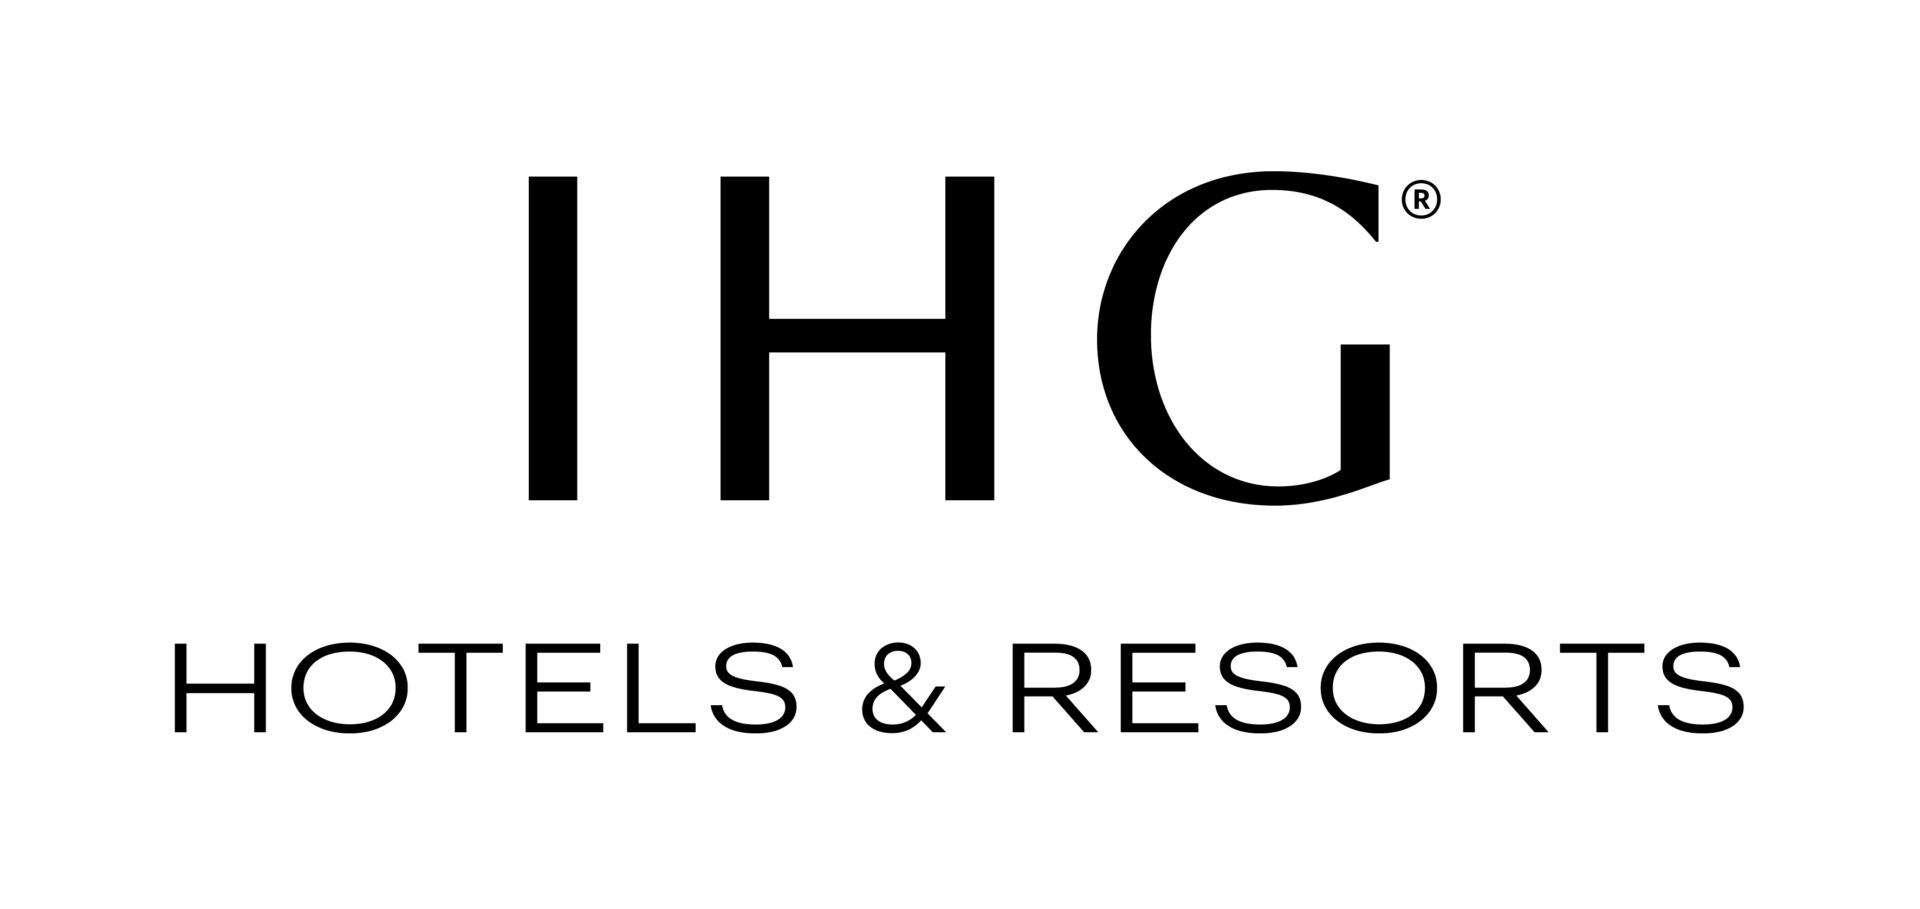 IHG partners with XECO Media LLP : IHG expands in India with signing of Holiday Inn Resort Karjat, Maharashtra